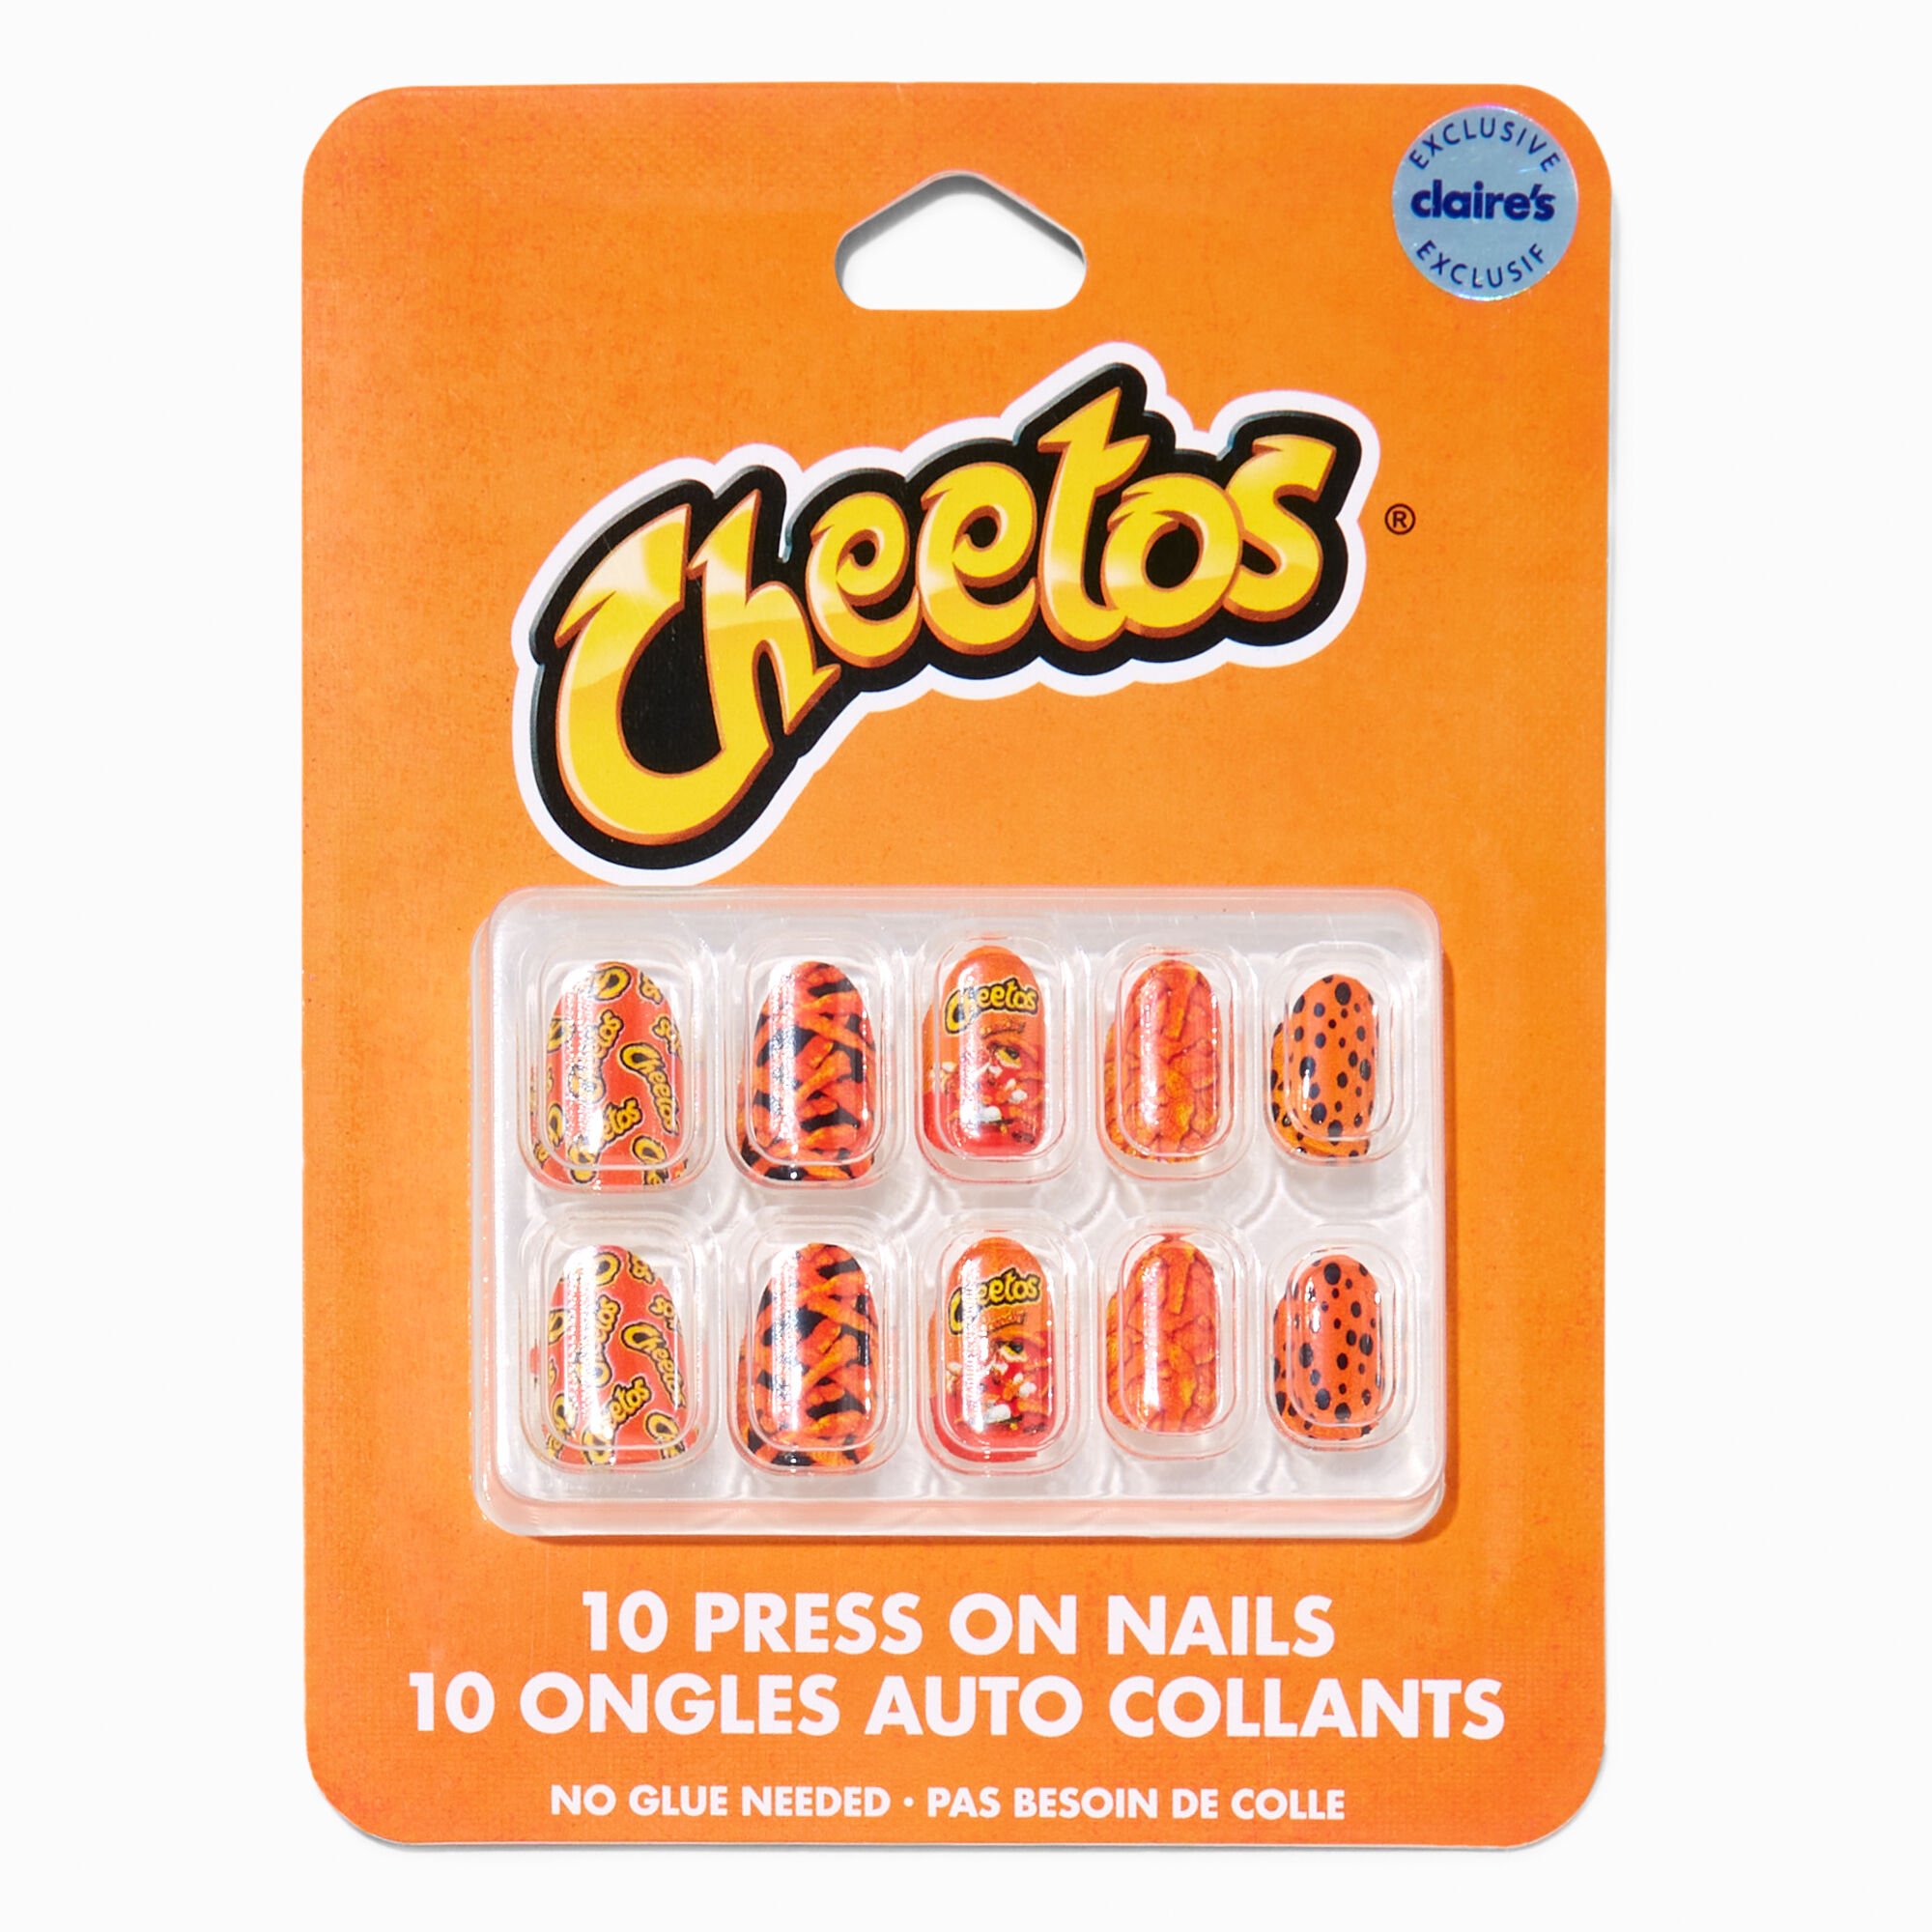 View Cheetos Claires Exclusive Stiletto Vegan Press On Faux Nail Set 10 Pack information